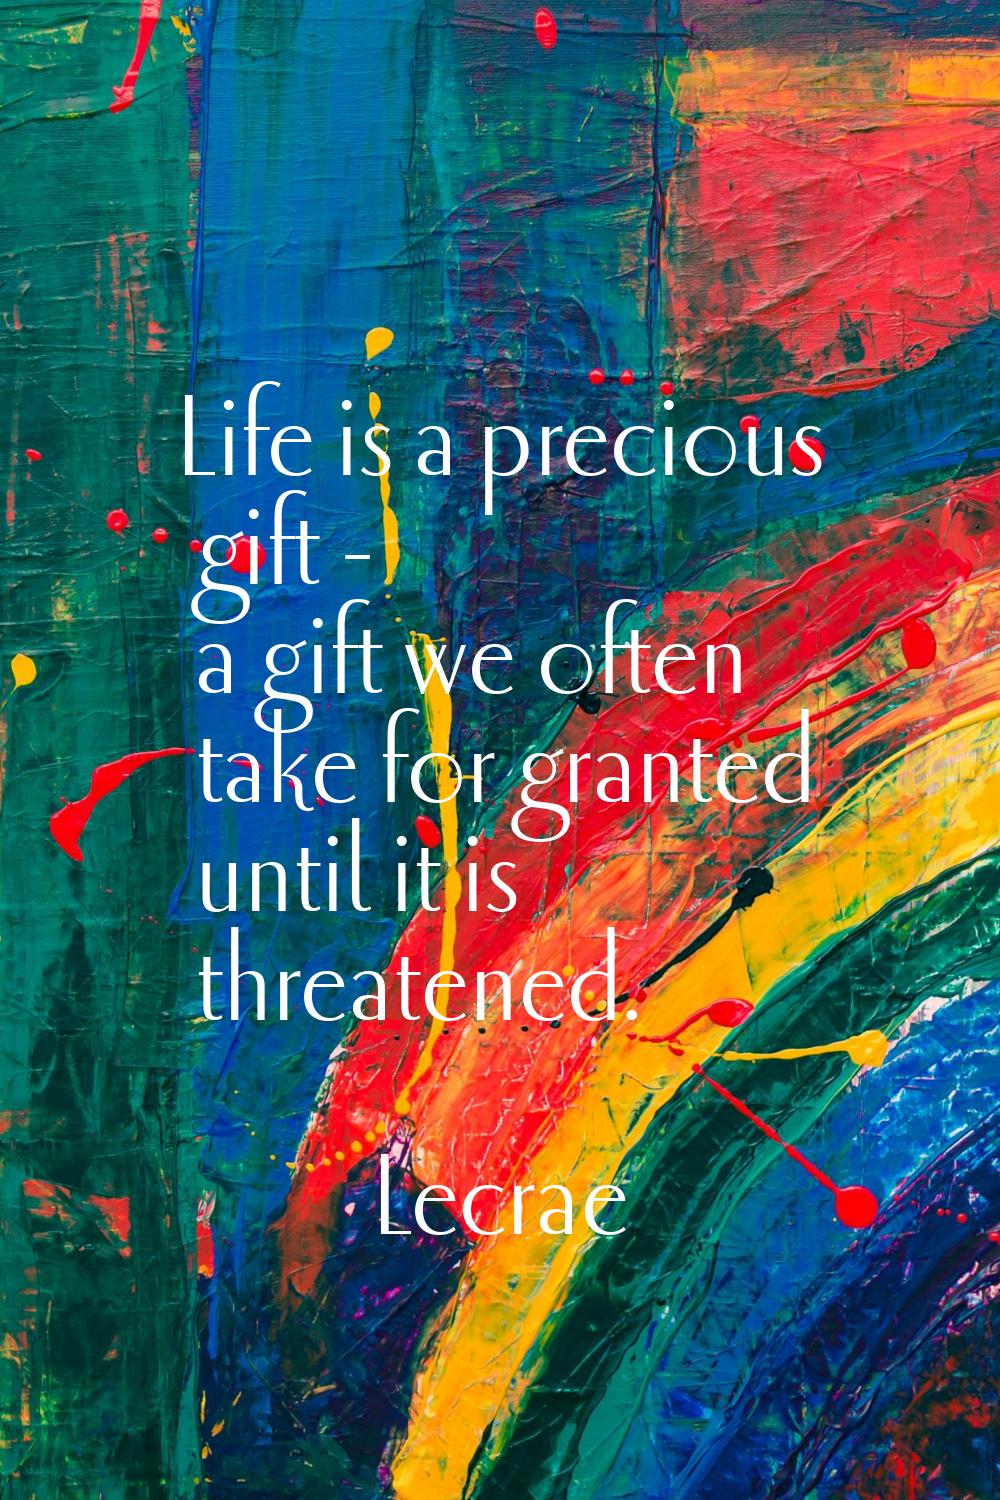 Life is a precious gift - a gift we often take for granted until it is threatened.